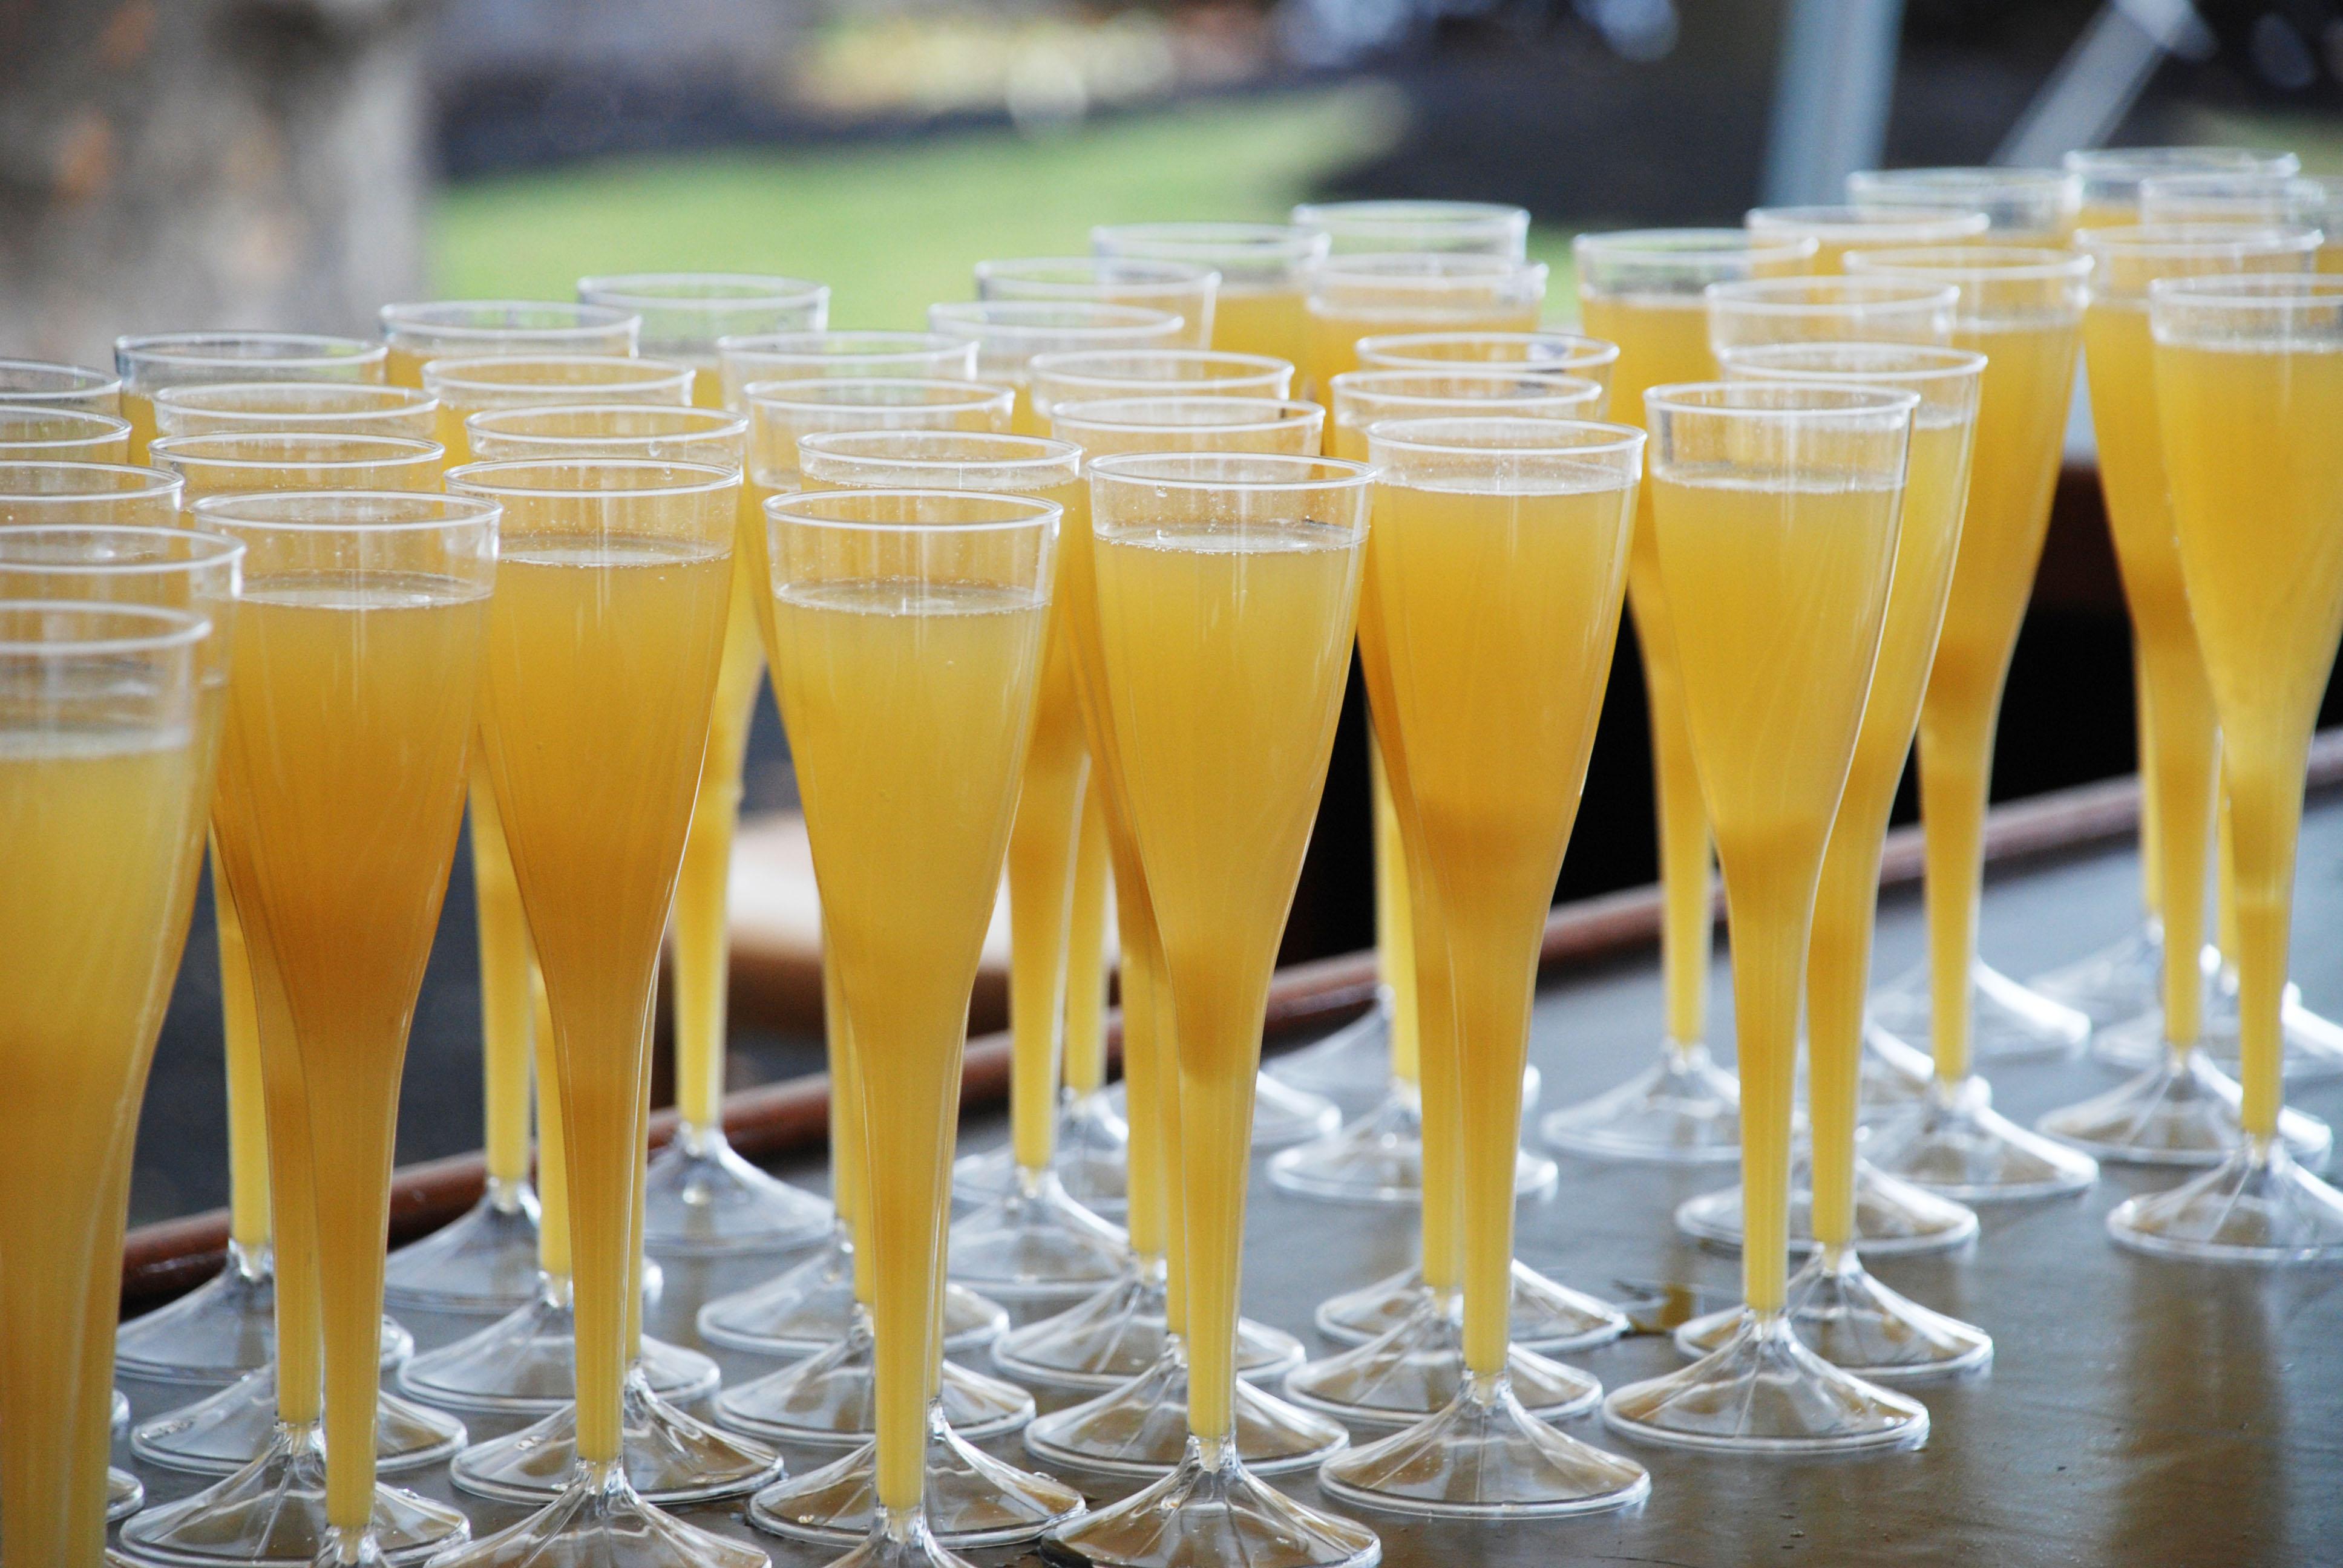 Grab a mimosa or five while listening to the Chicago Philharmonic Chamber Players Sunday morning. (Joe Shlabotnik / Flickr)